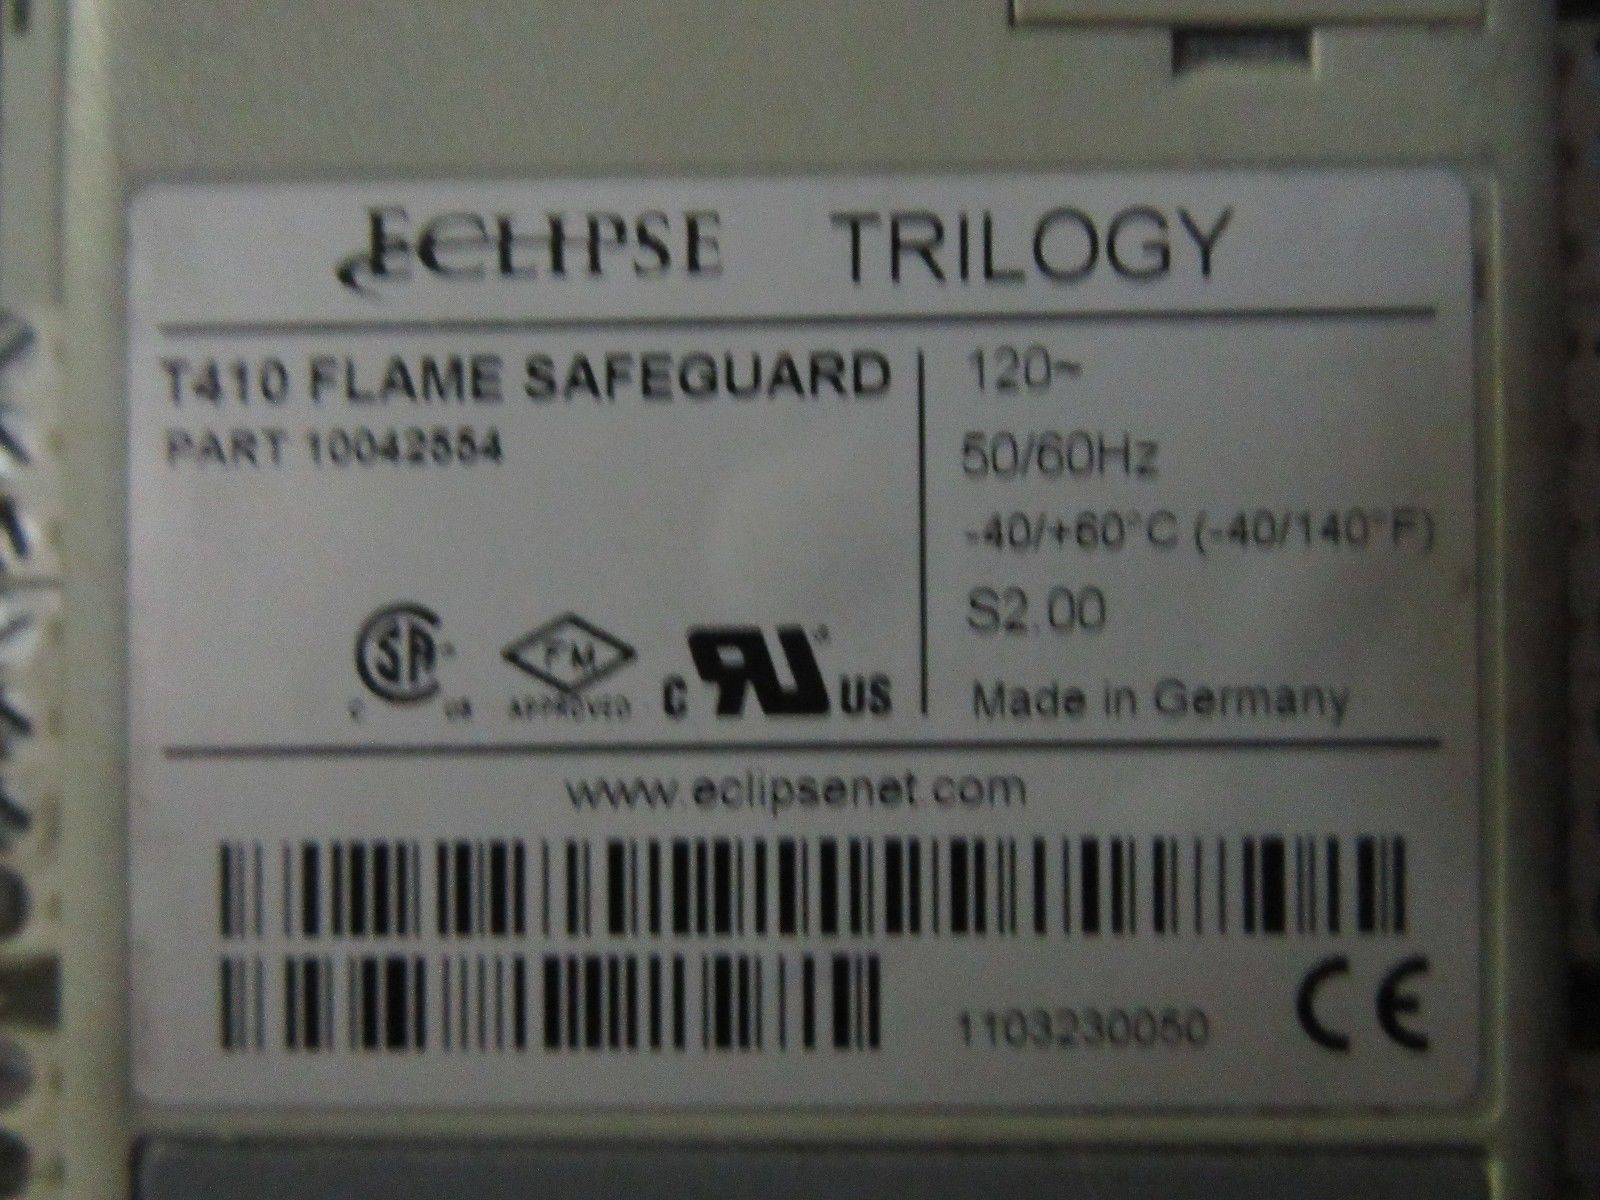 Eclipse Trilogy T410 Flame Safeguard 10042554 Lot of three modules 